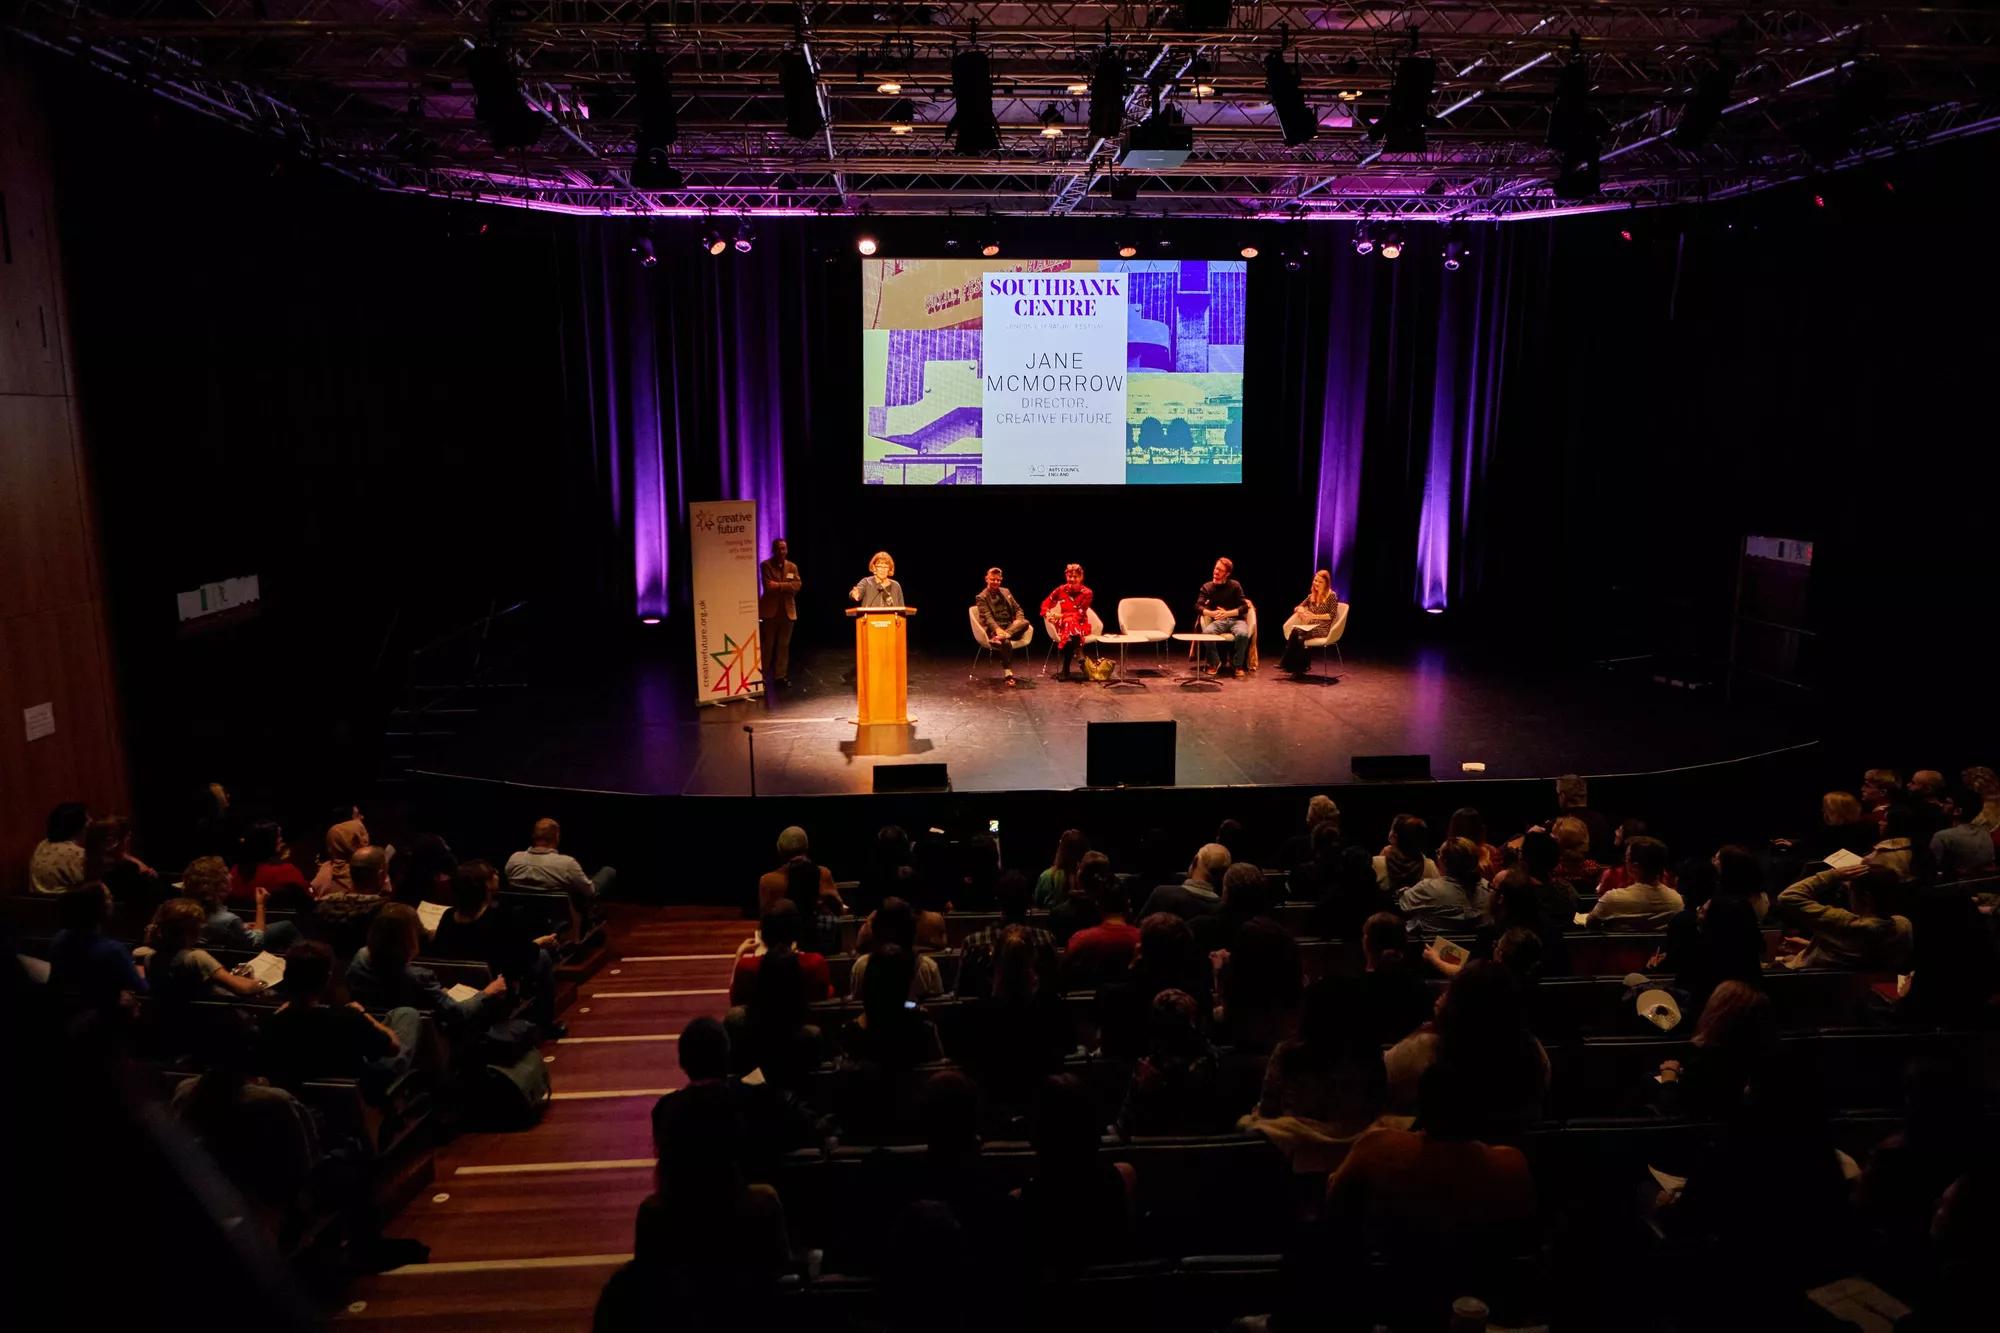 Panel discussion happening on the Purcell Room stage, with a full audience.